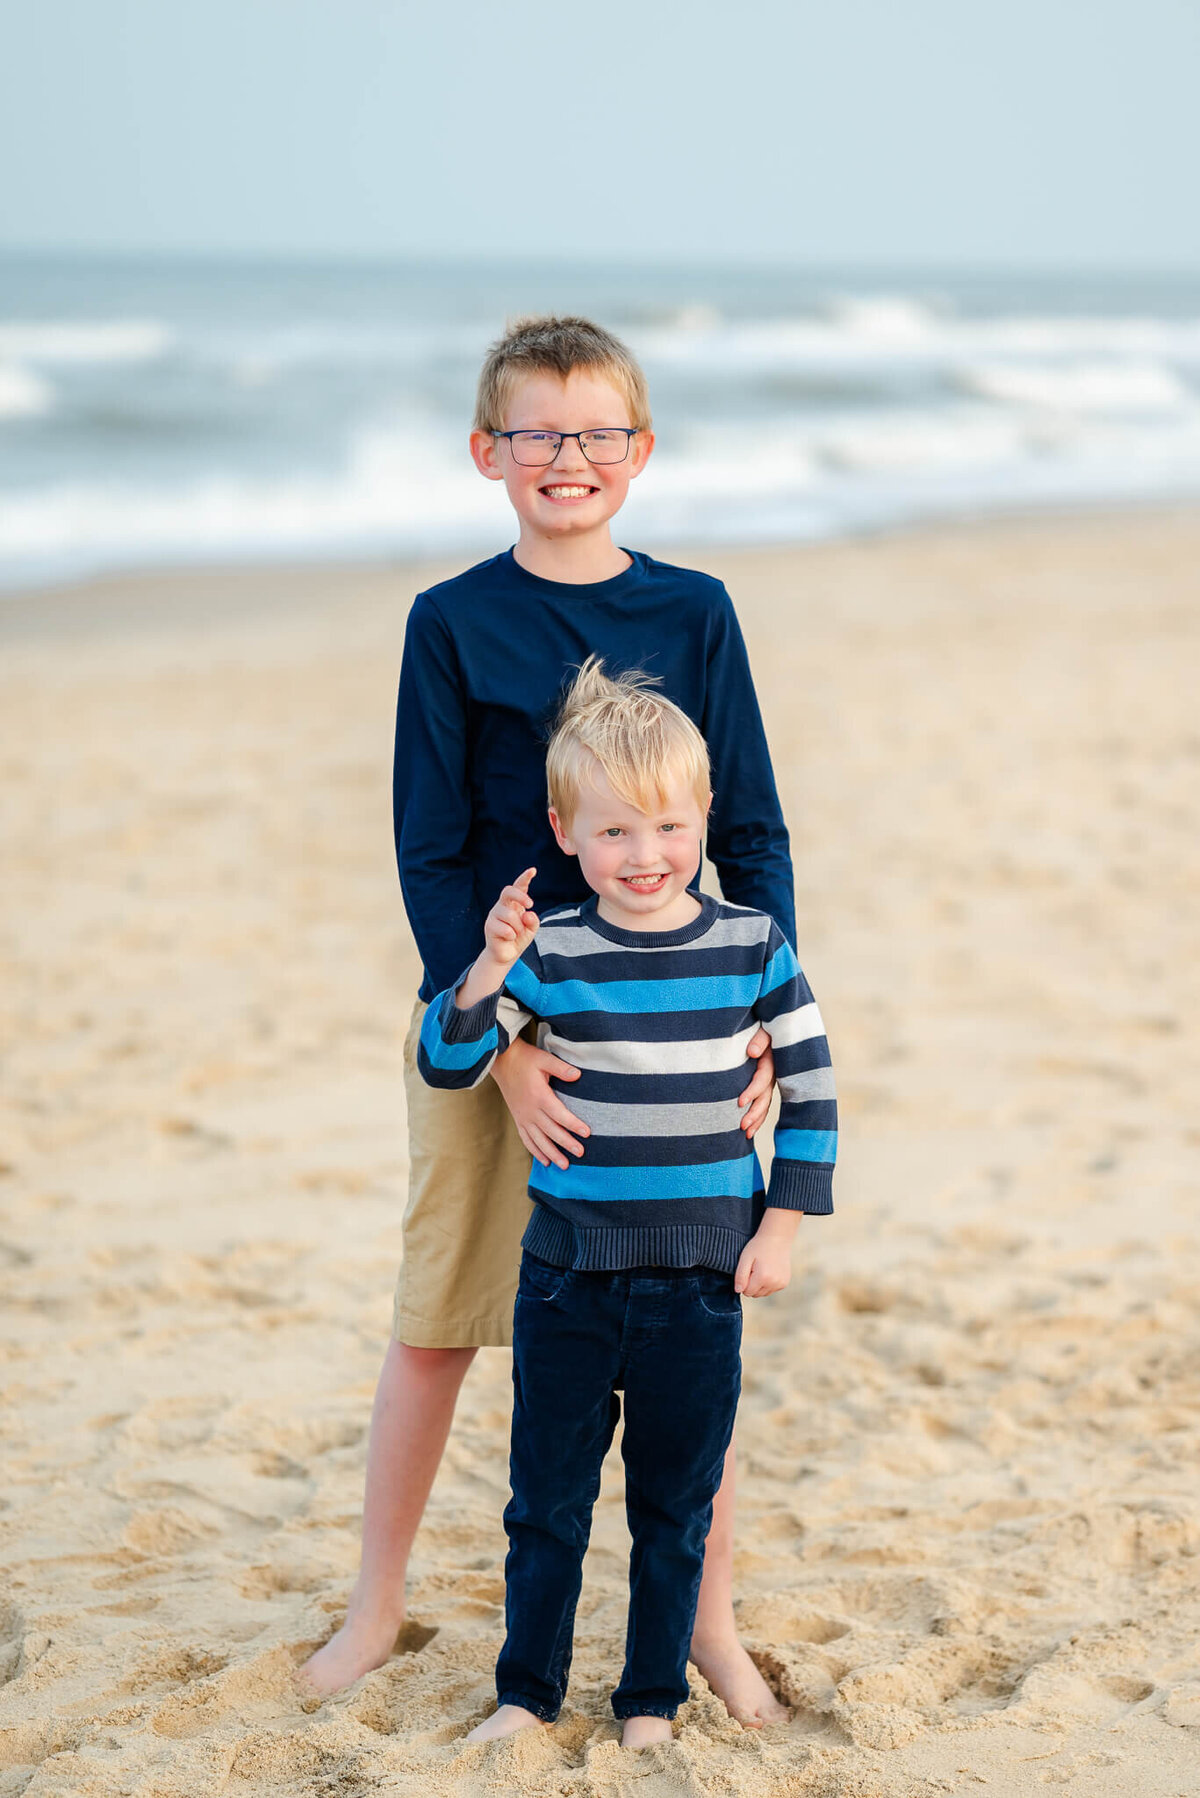 Justine Renee Photography captures a picture of two brothers in front of the  water at the beach. The boys are all smiles for the photo.